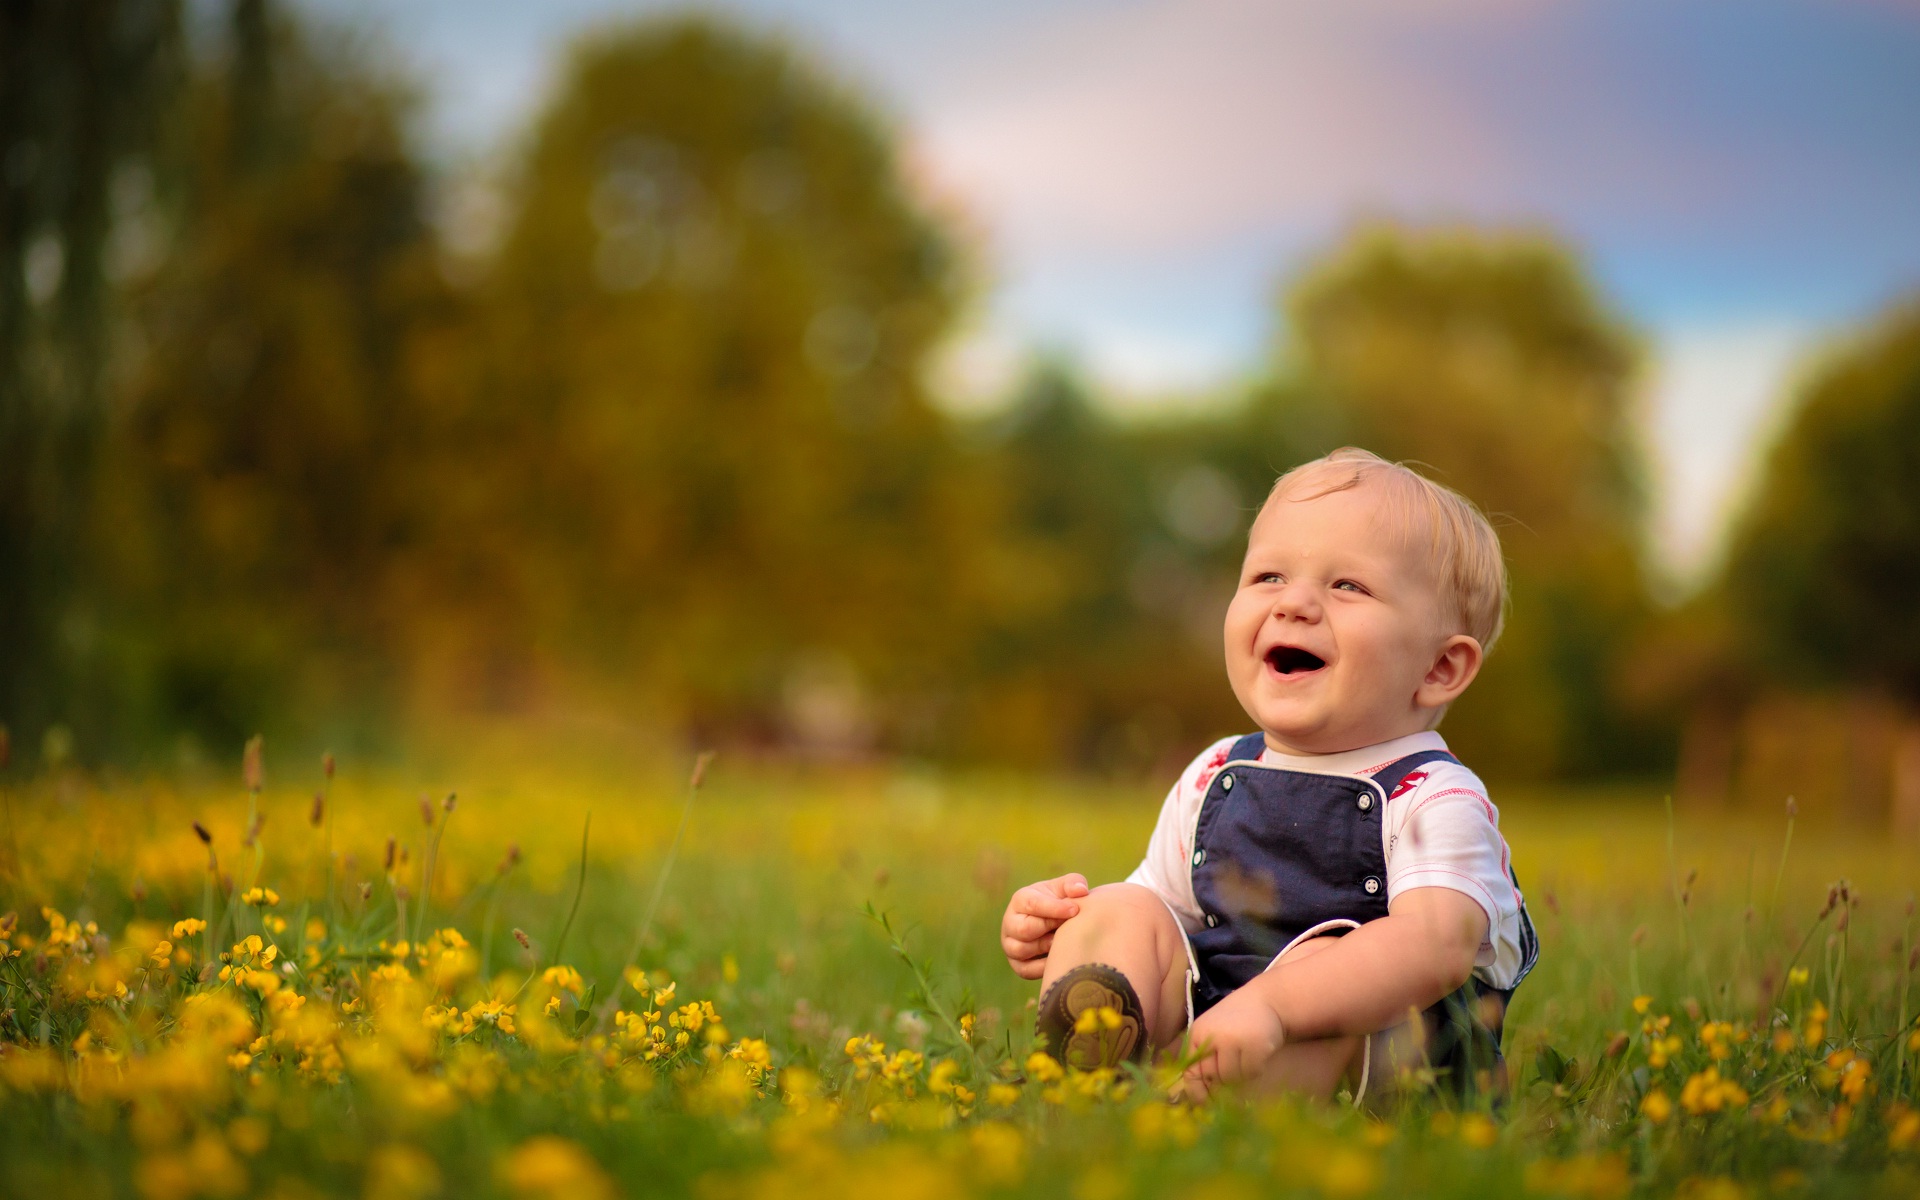 Quick Tips To Keep Your Little One Happy